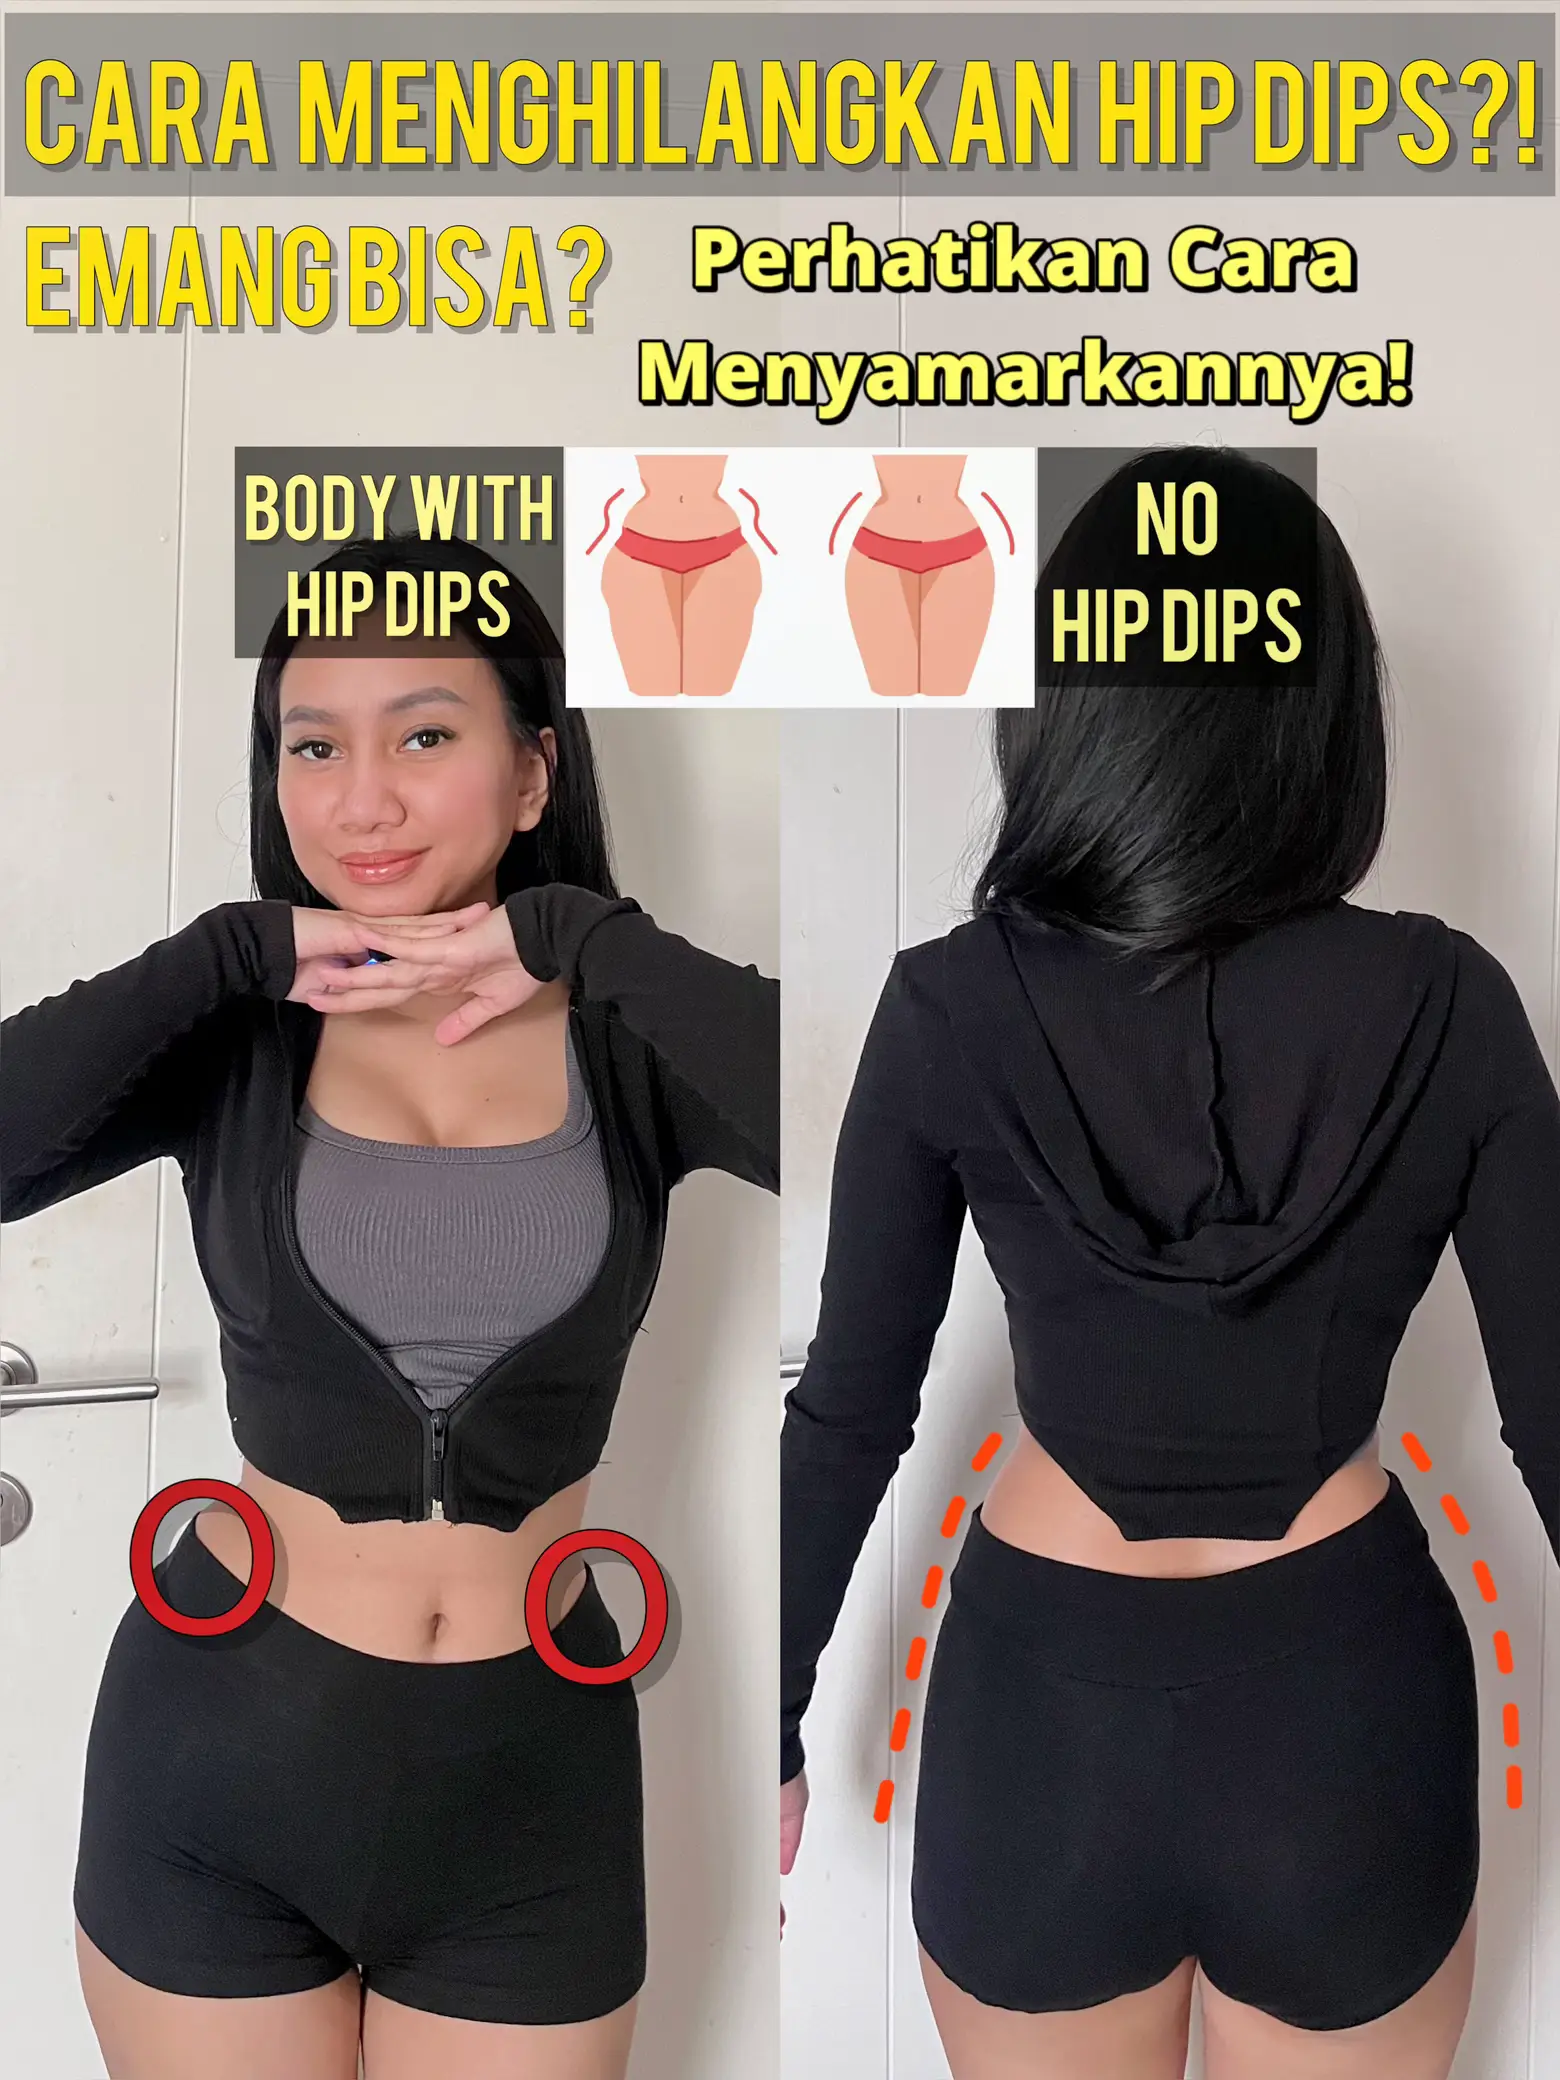 My “hip dips” are not proportional and I'm looking for exercise to